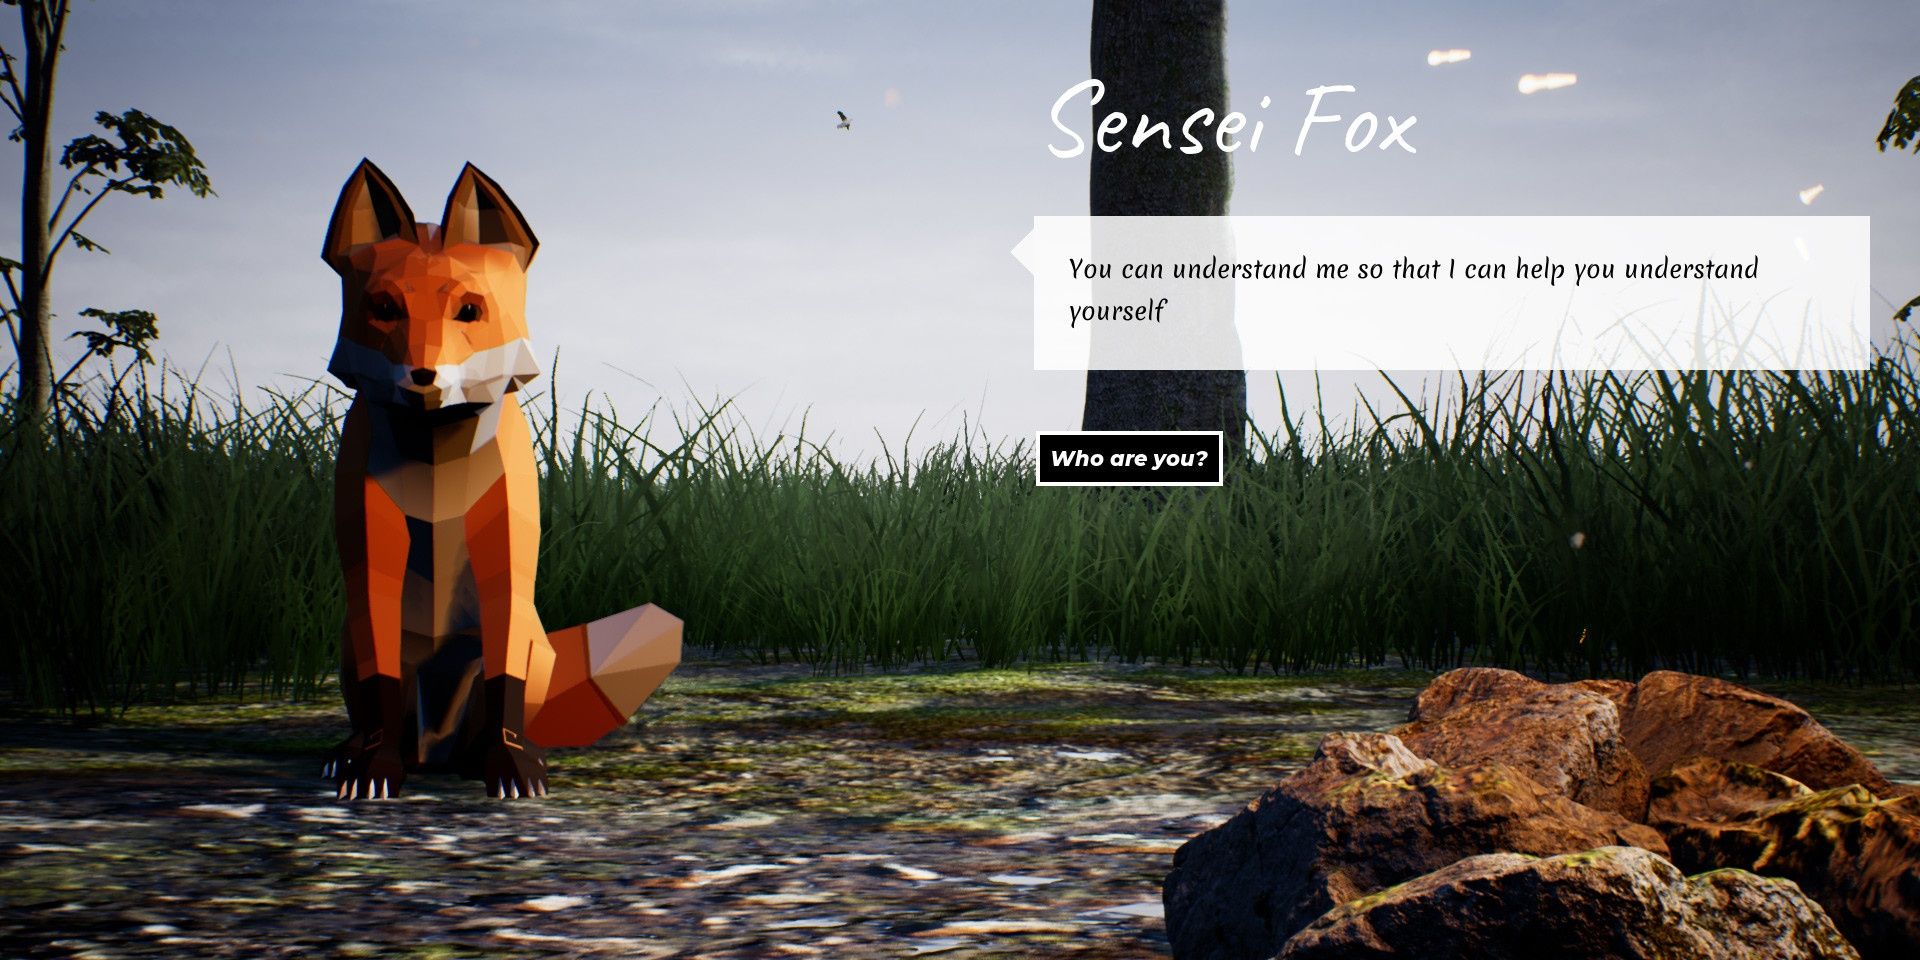 A fox (left) facing the viewer in a field. Text on the right reads "Sensei Fox: You can understand me so that I can help you understand yourself." Response under the text reads, "Who are you?" Image Credit: store.steampowered.com